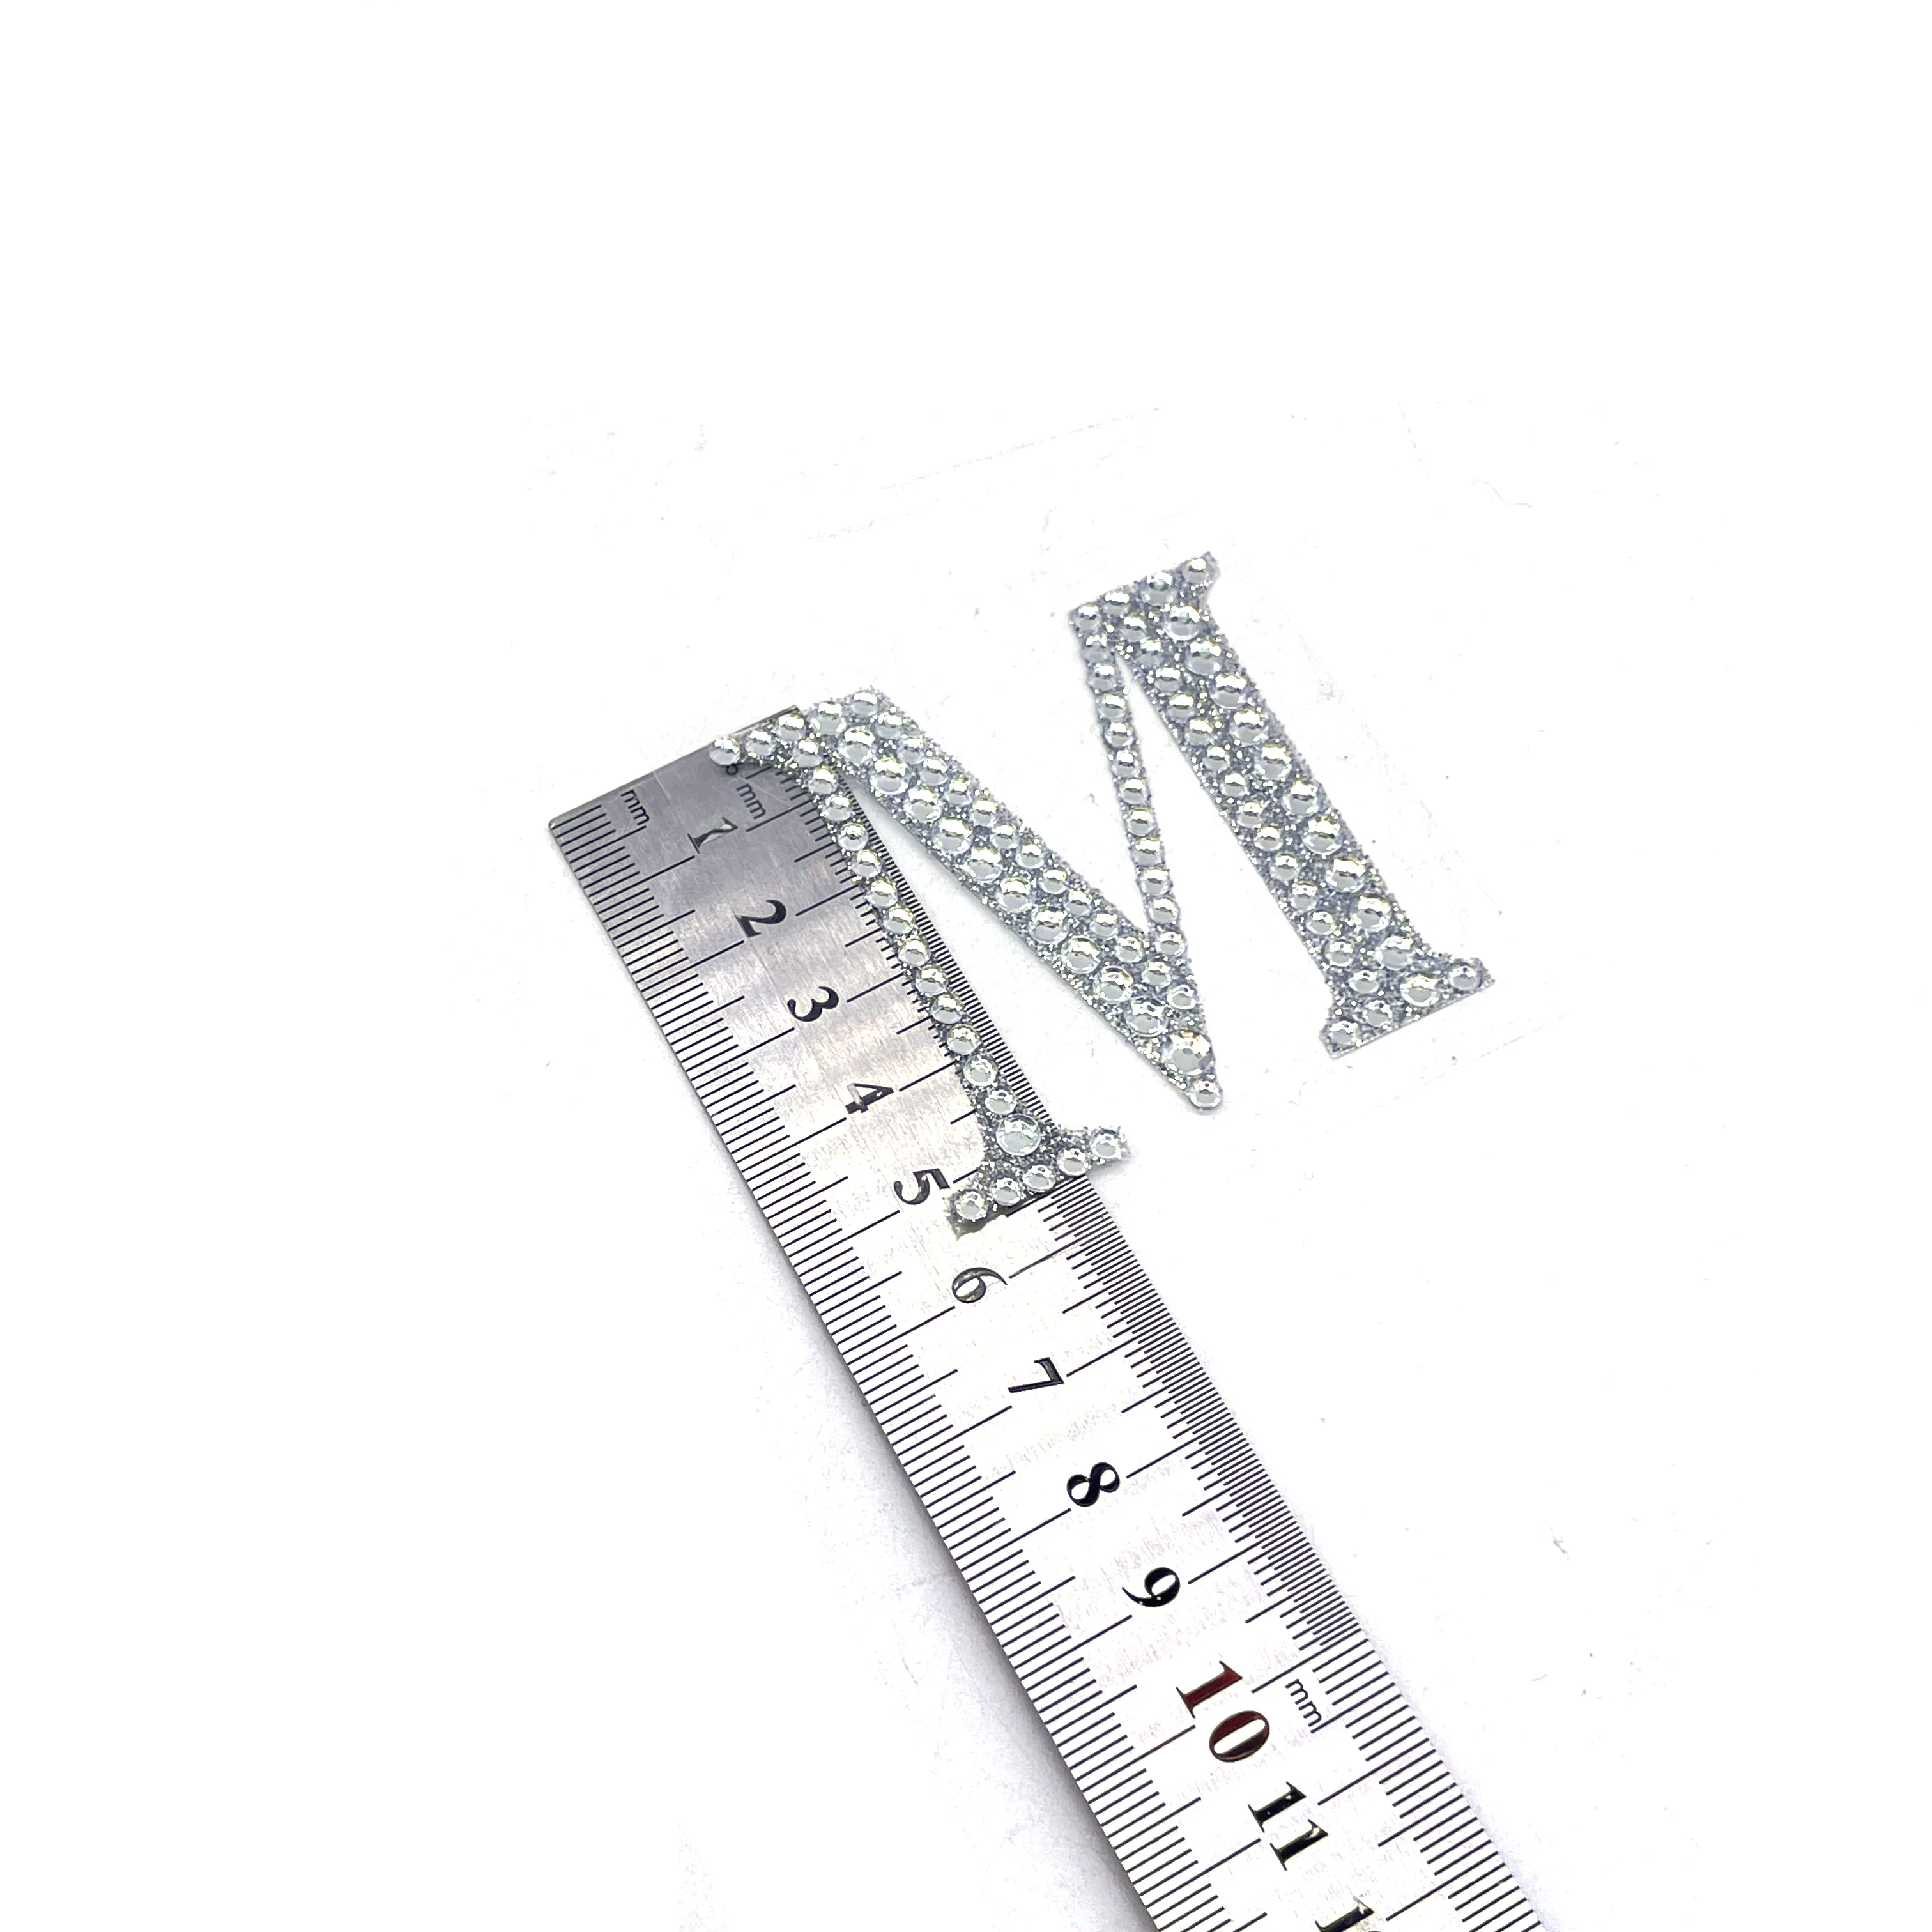 6 Sheets Glitter Letter Stickers Rhinestone Letter Stickers and Bling  Letter Stickers, 26 Letters Self Adhesive Stickers Alphabet Bling Letter